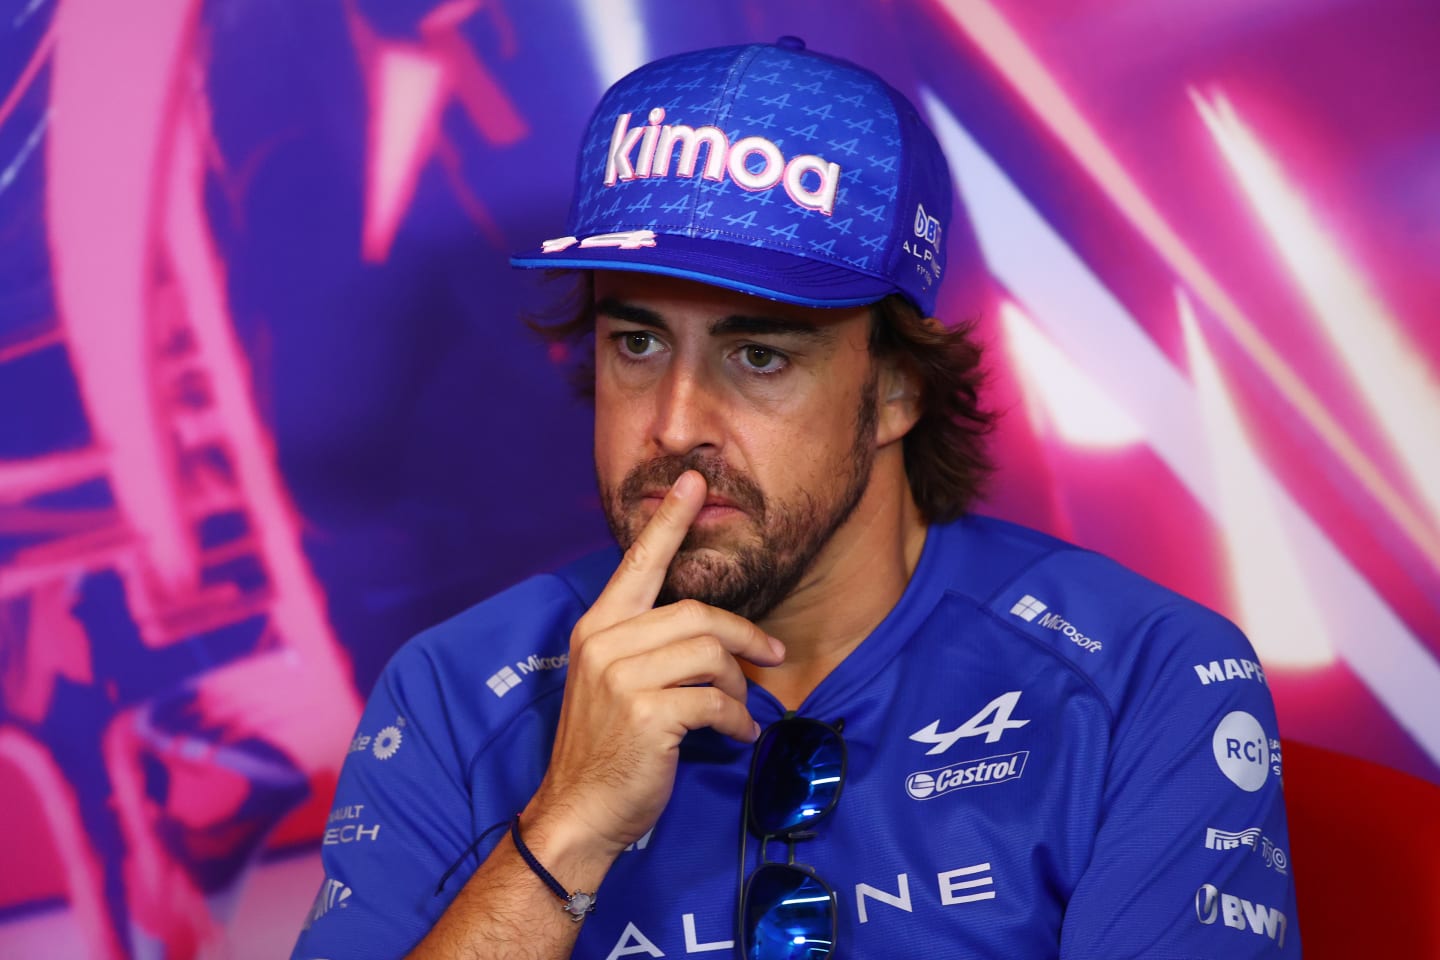 MONTREAL, QUEBEC - JUNE 17: Fernando Alonso of Spain and Alpine F1 looks on in the Drivers Press Conference prior to practice ahead of the F1 Grand Prix of Canada at Circuit Gilles Villeneuve on June 17, 2022 in Montreal, Quebec. (Photo by Dan Istitene/Getty Images)